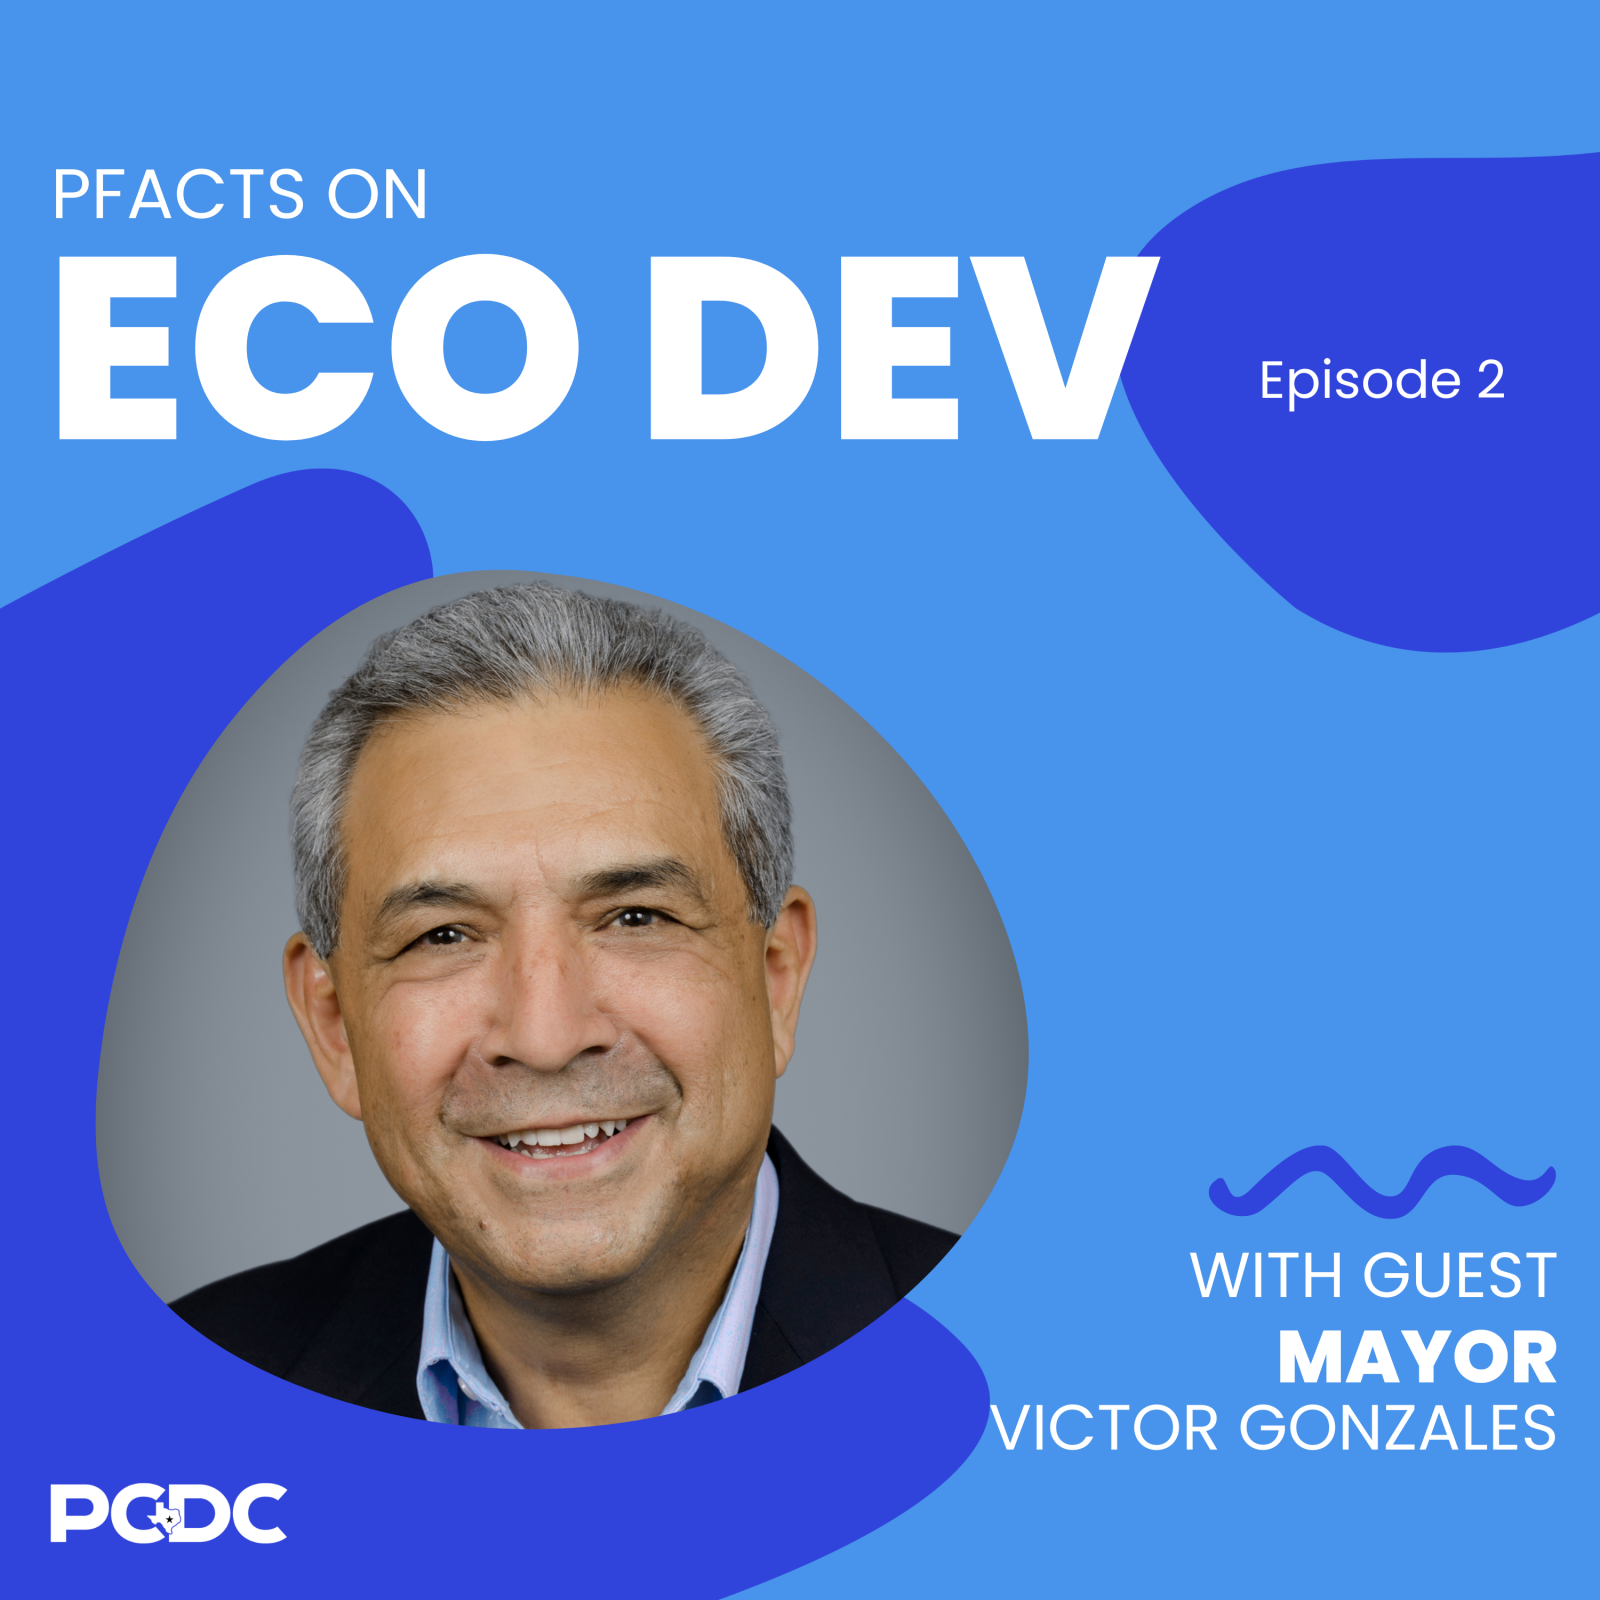 PFACTS ON ECO DEV PODCAST EPISODE 2 Photo